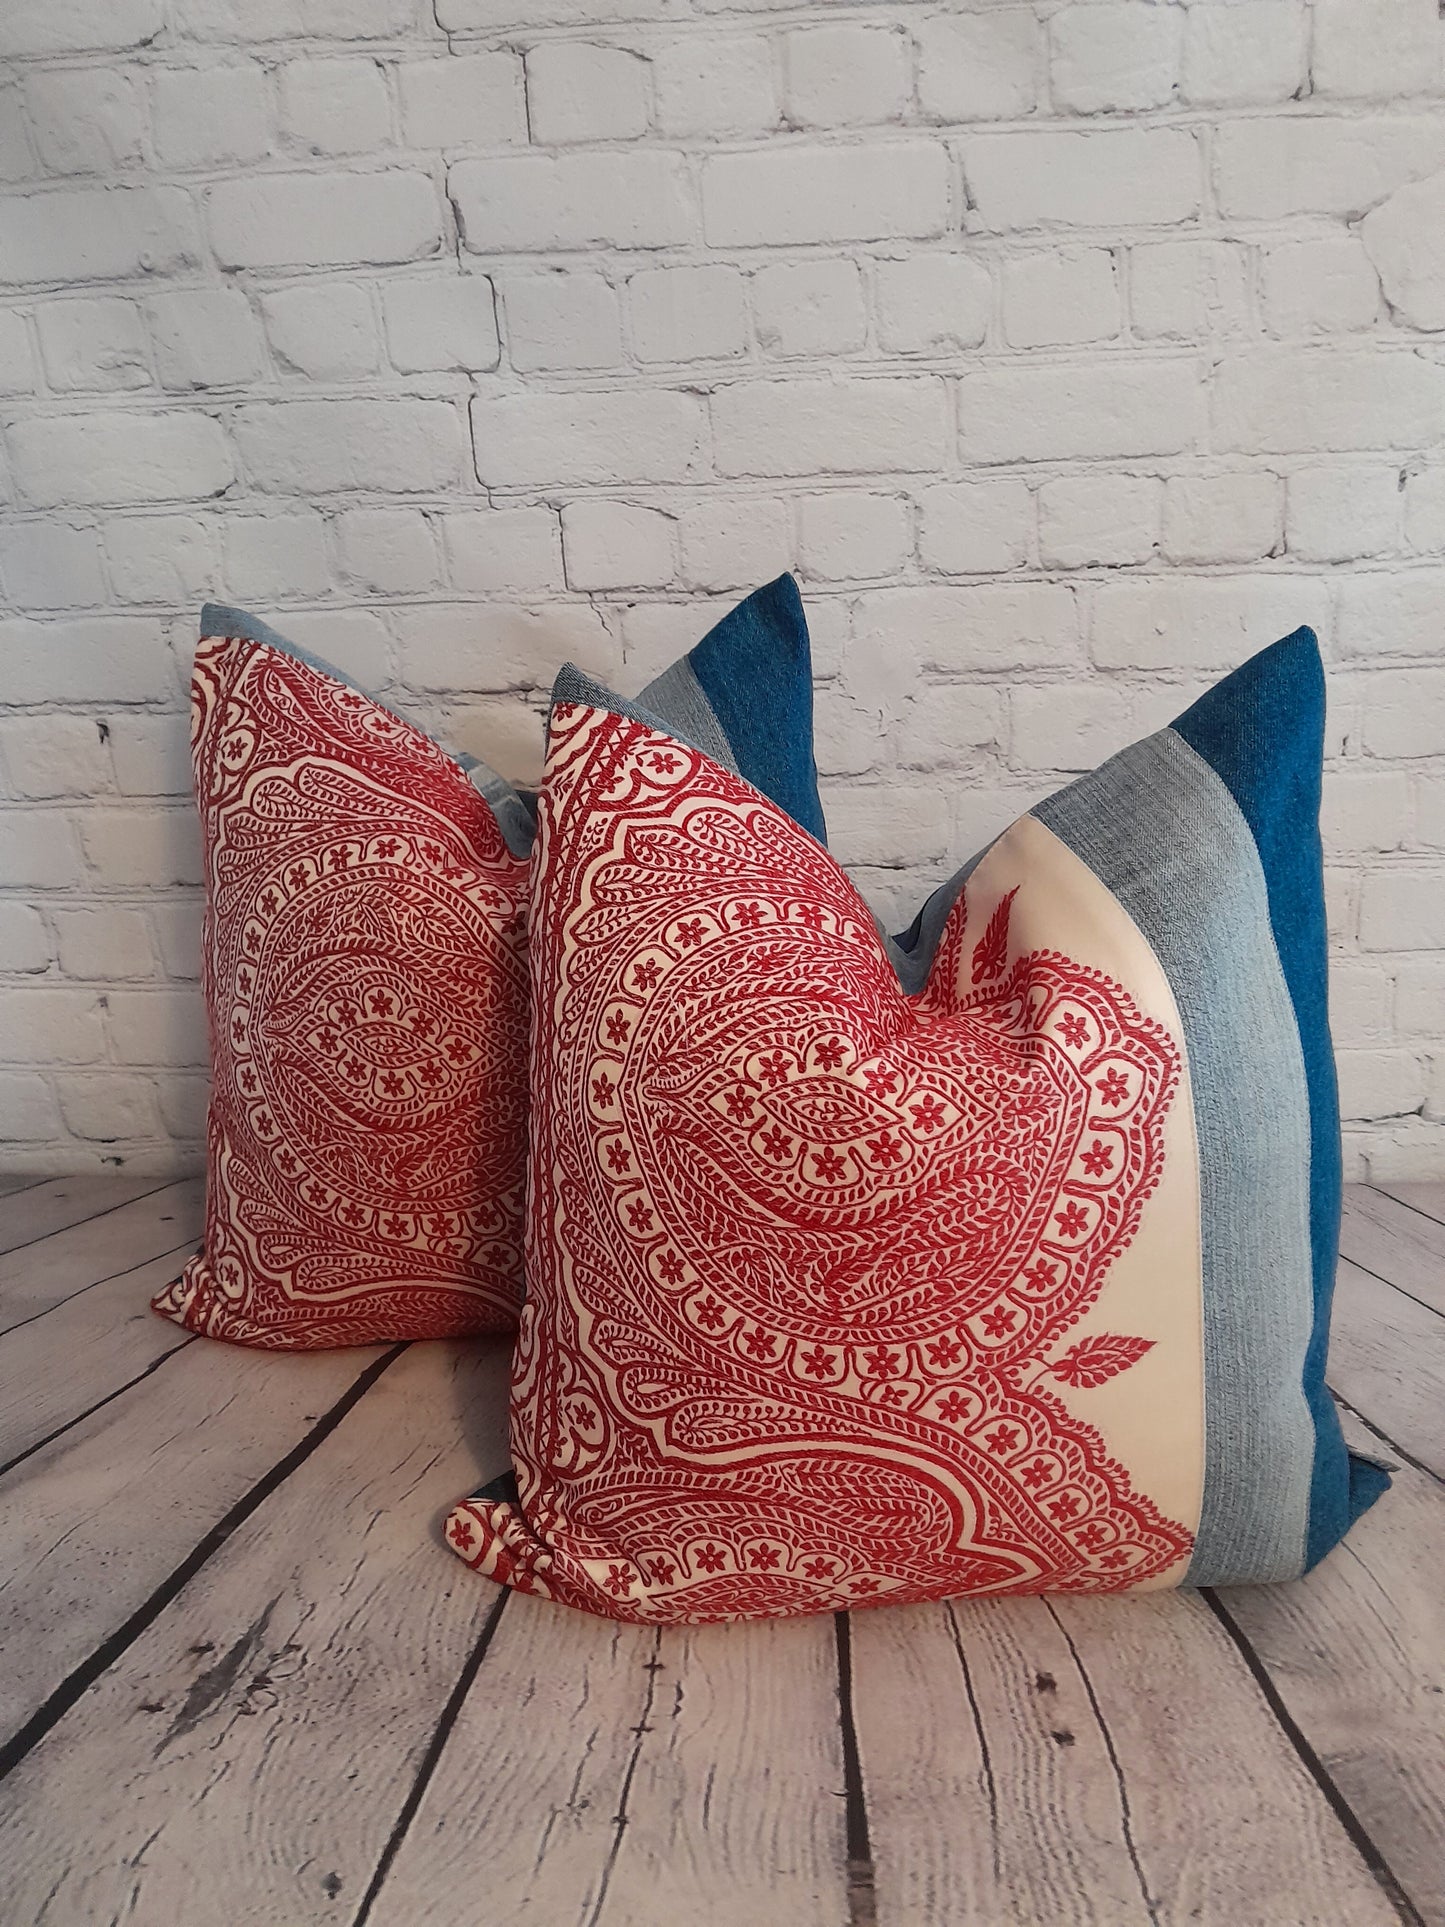 denim and embroidered cushion luxury boho throw pillows in blue cream and red